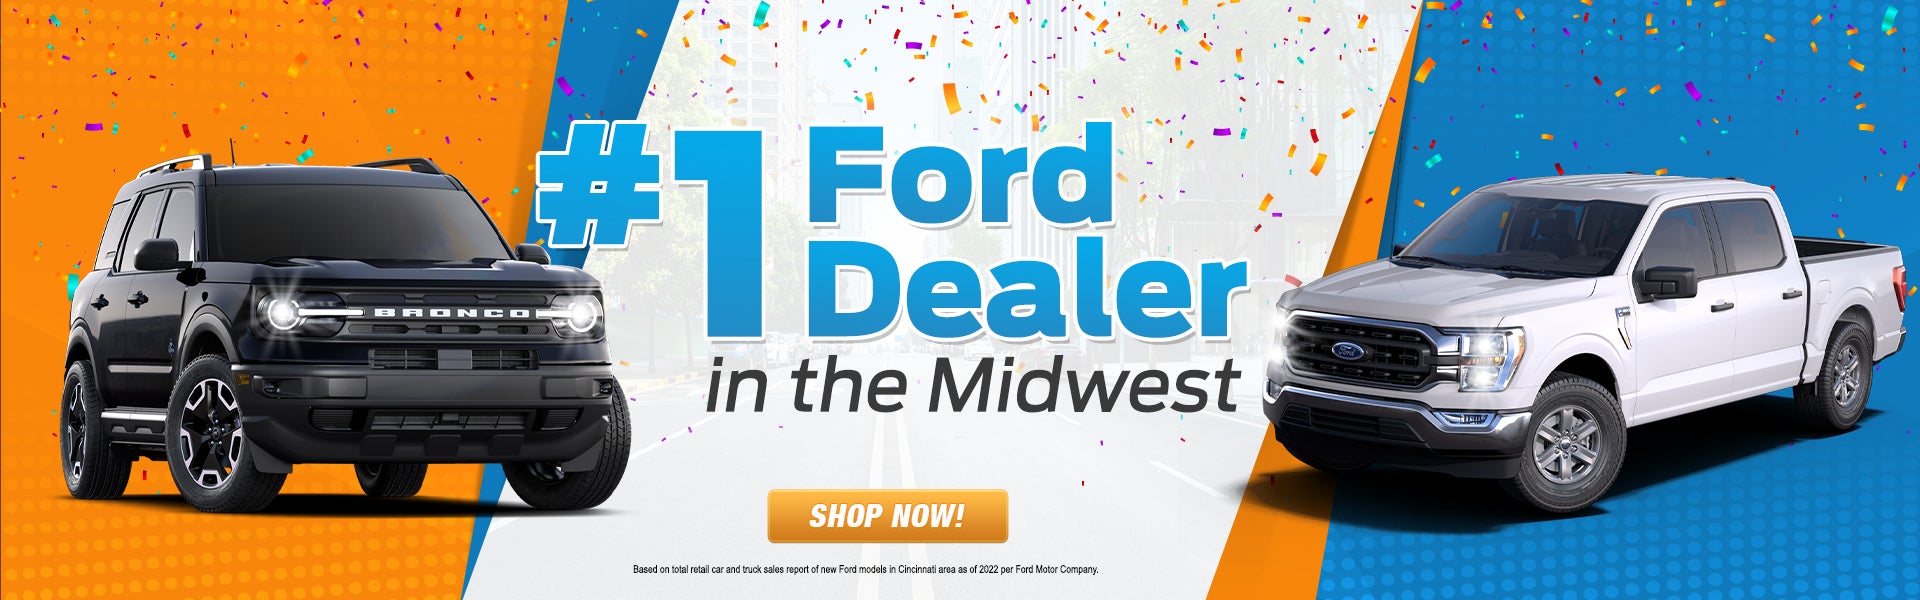 #1 Ford Dealer in the Midwest